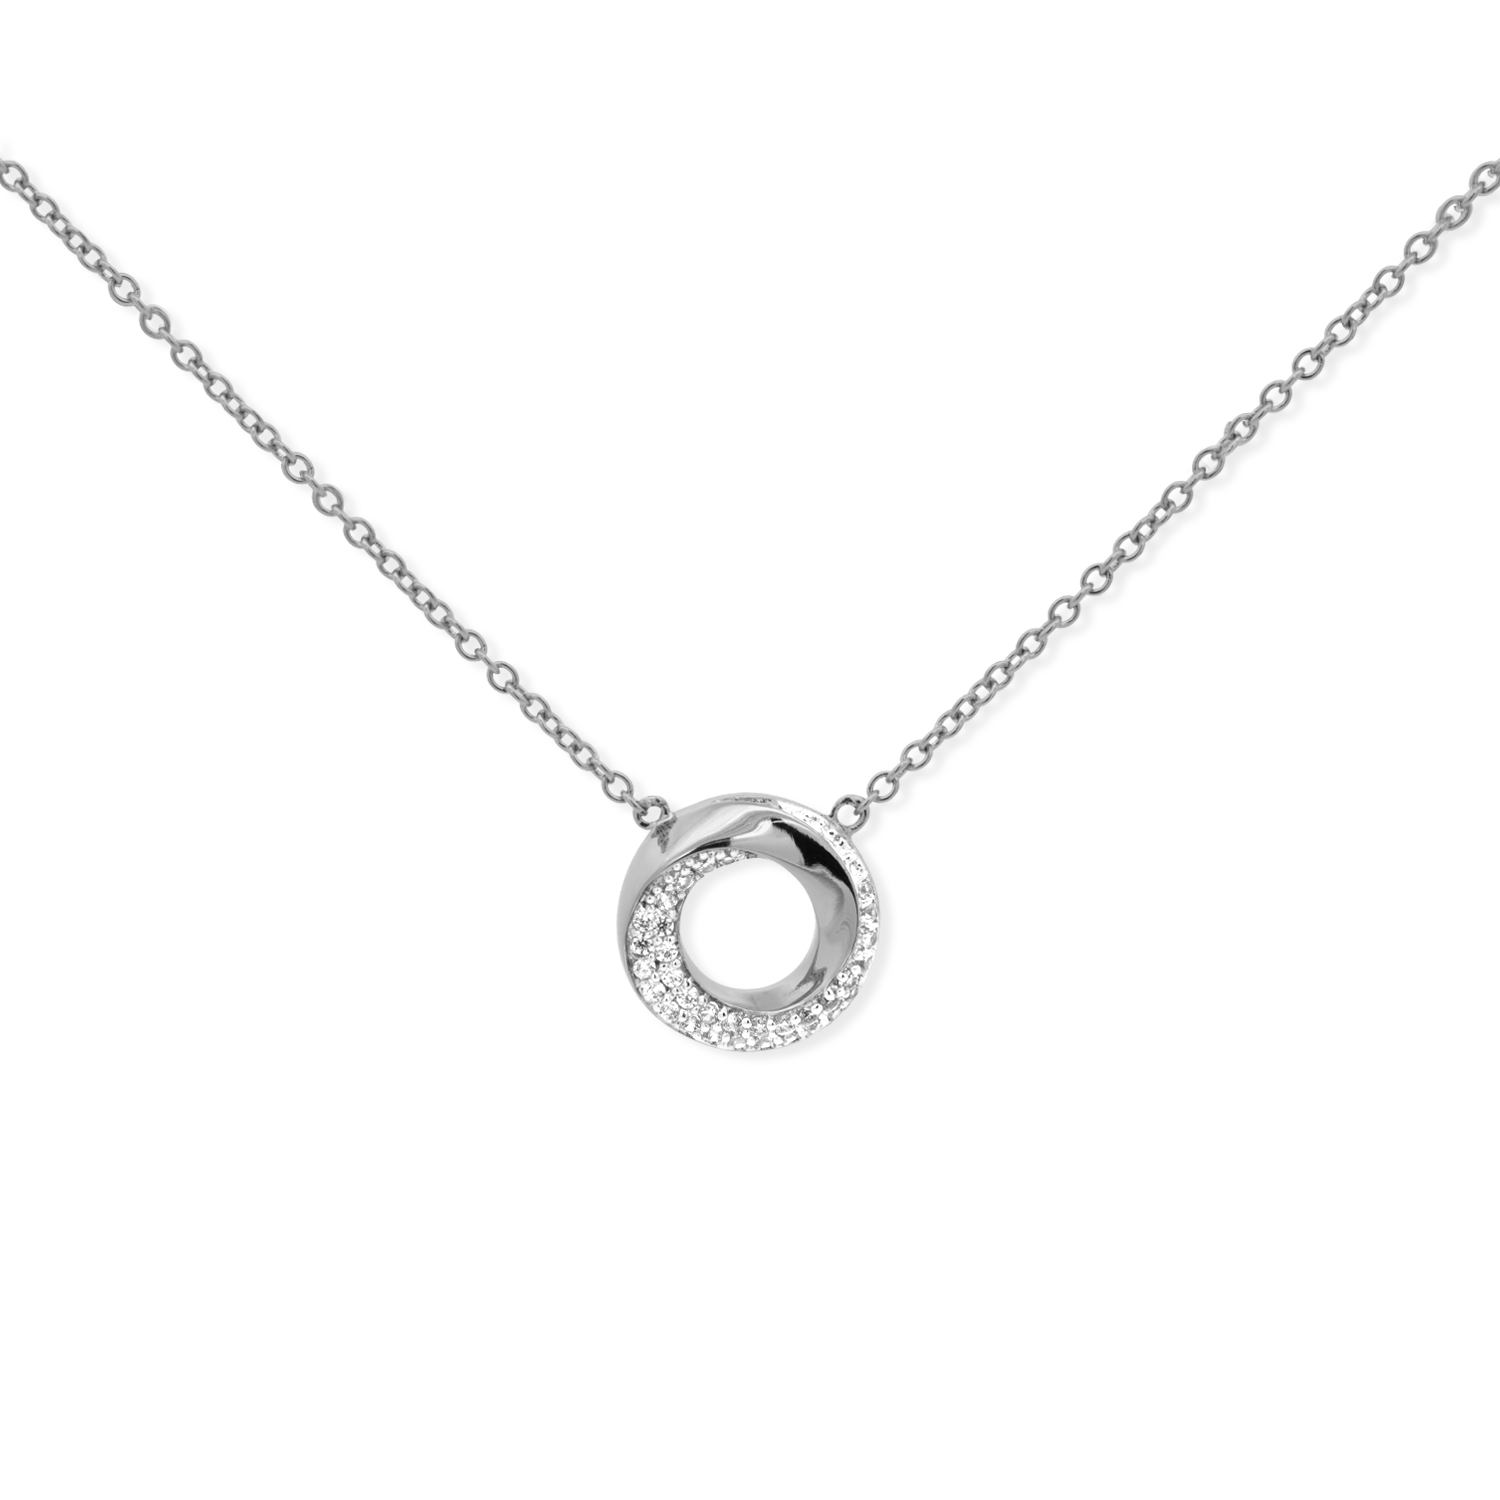 Elegant yet bold necklace. 925 silver pendant necklace with  cubic zirconia stones. 